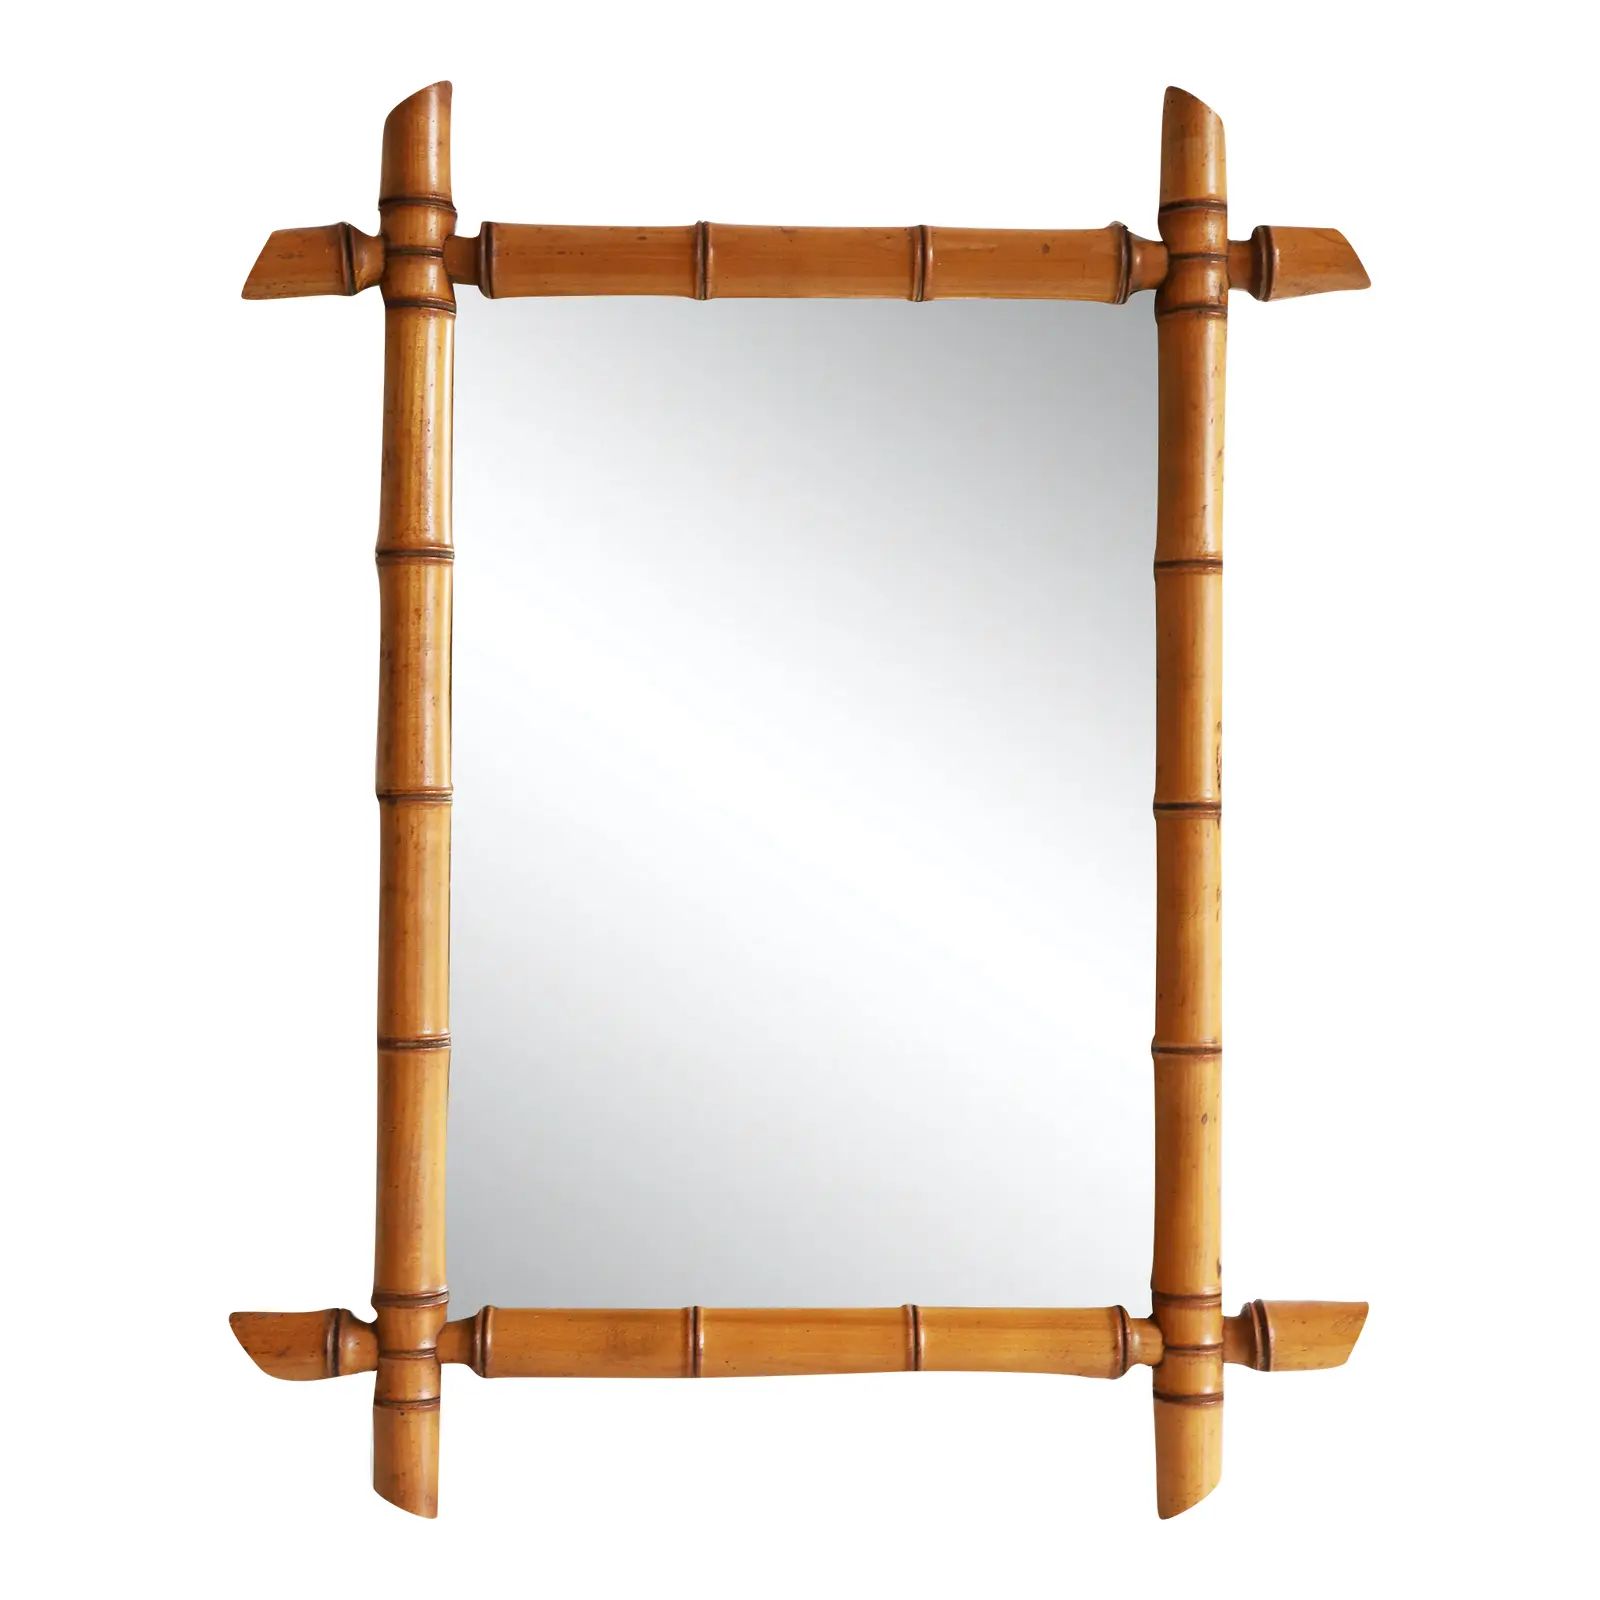 1920s French Faux Bamboo Mirror | Chairish